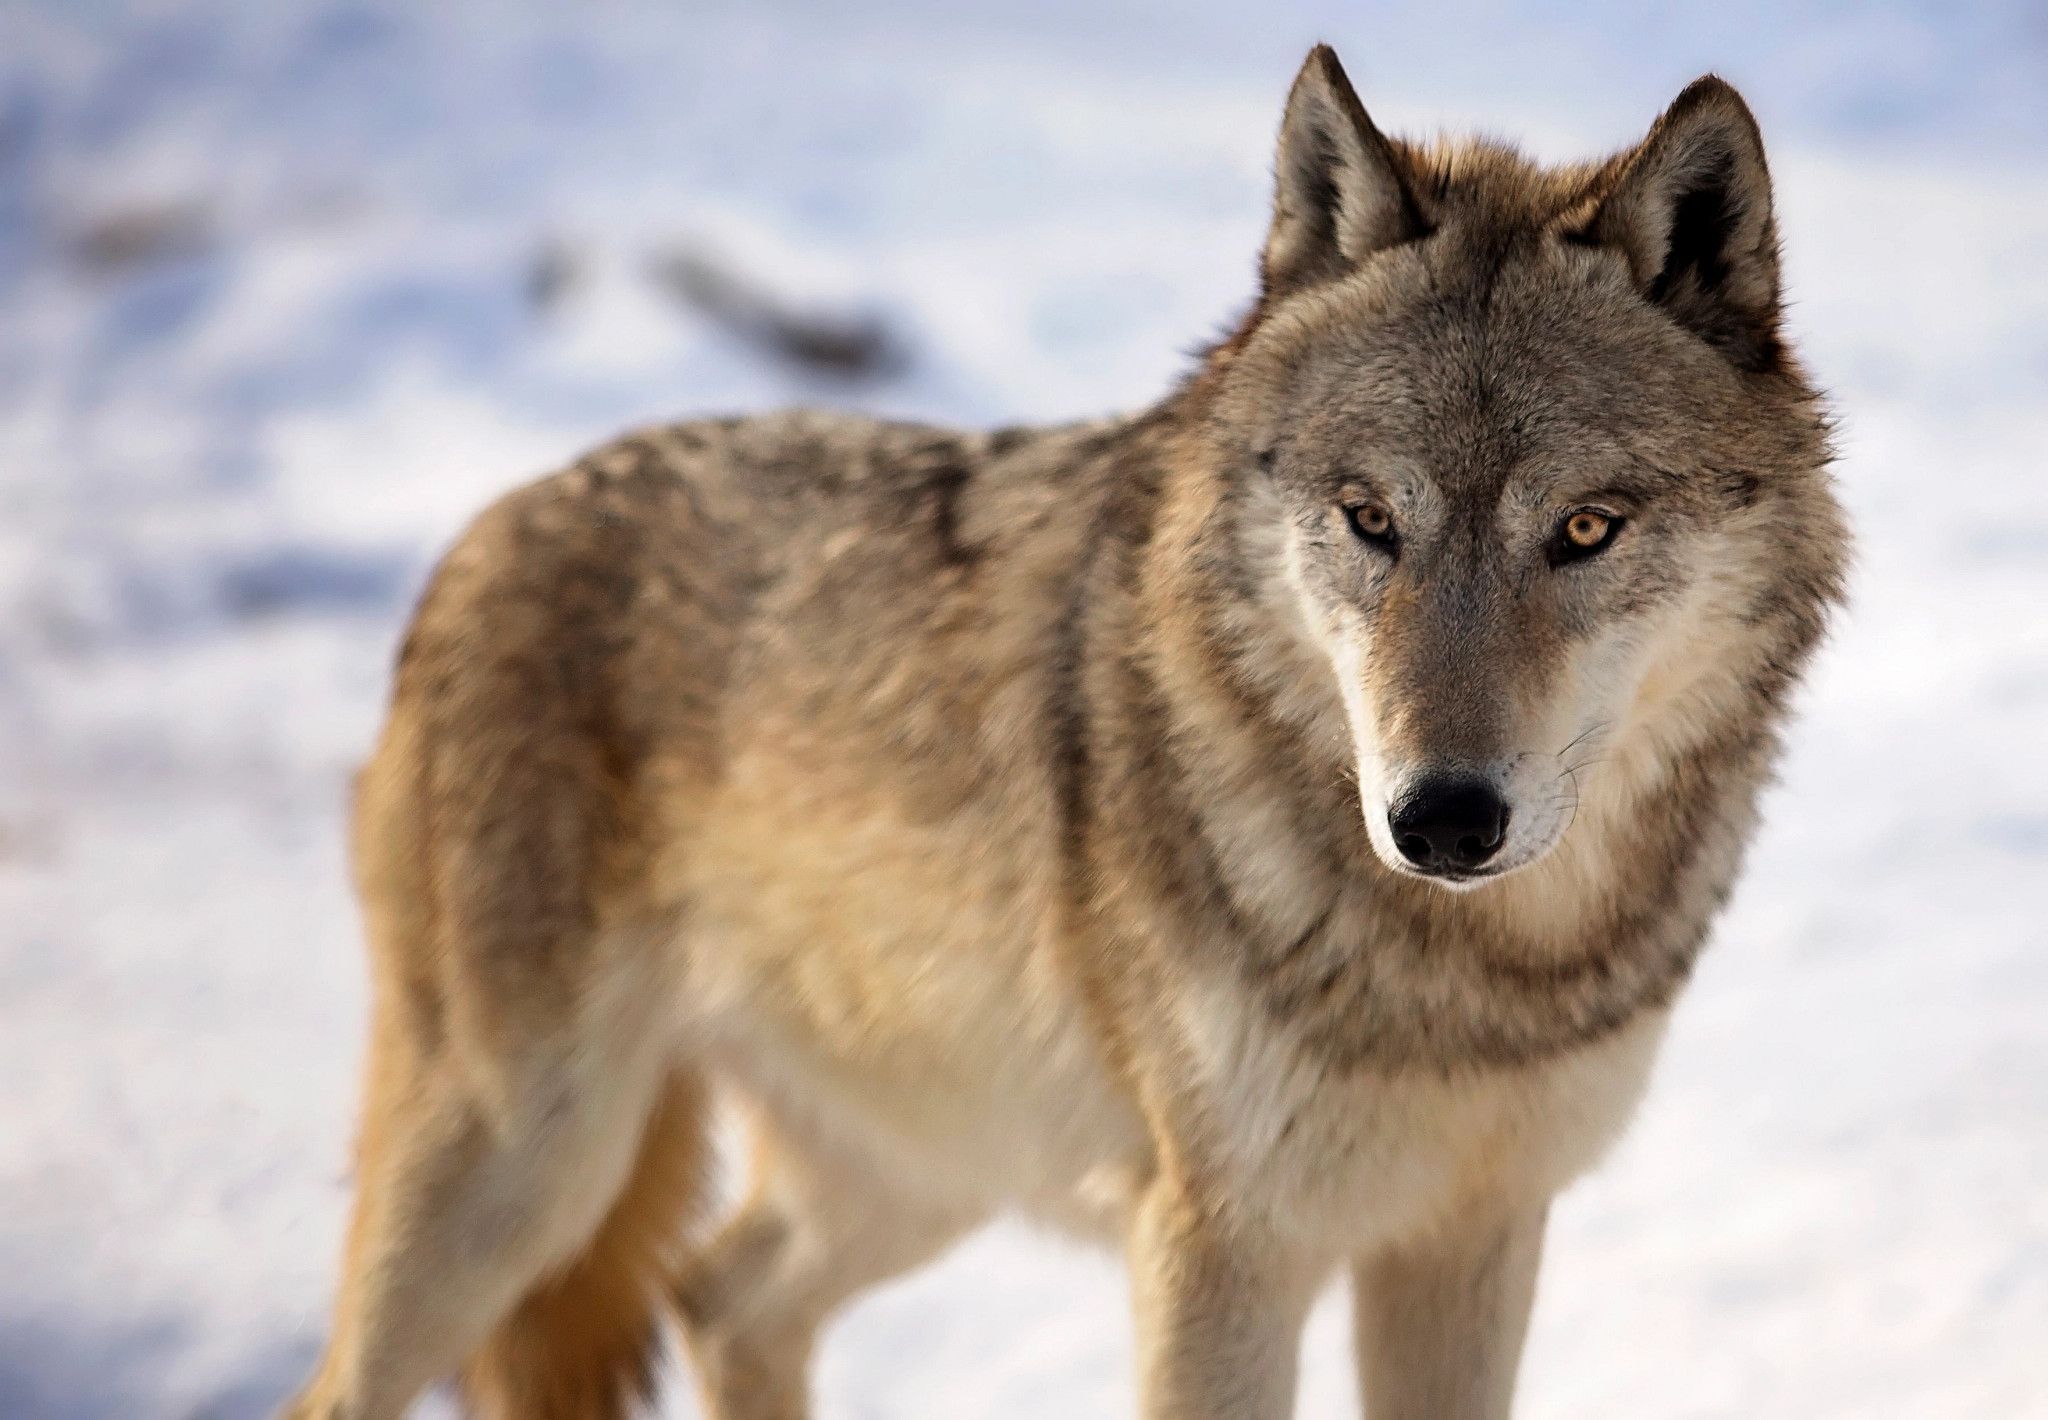 Wisconsin’s fall wolf hunt is on hold. Several lawsuits could affect whether it moves forward.